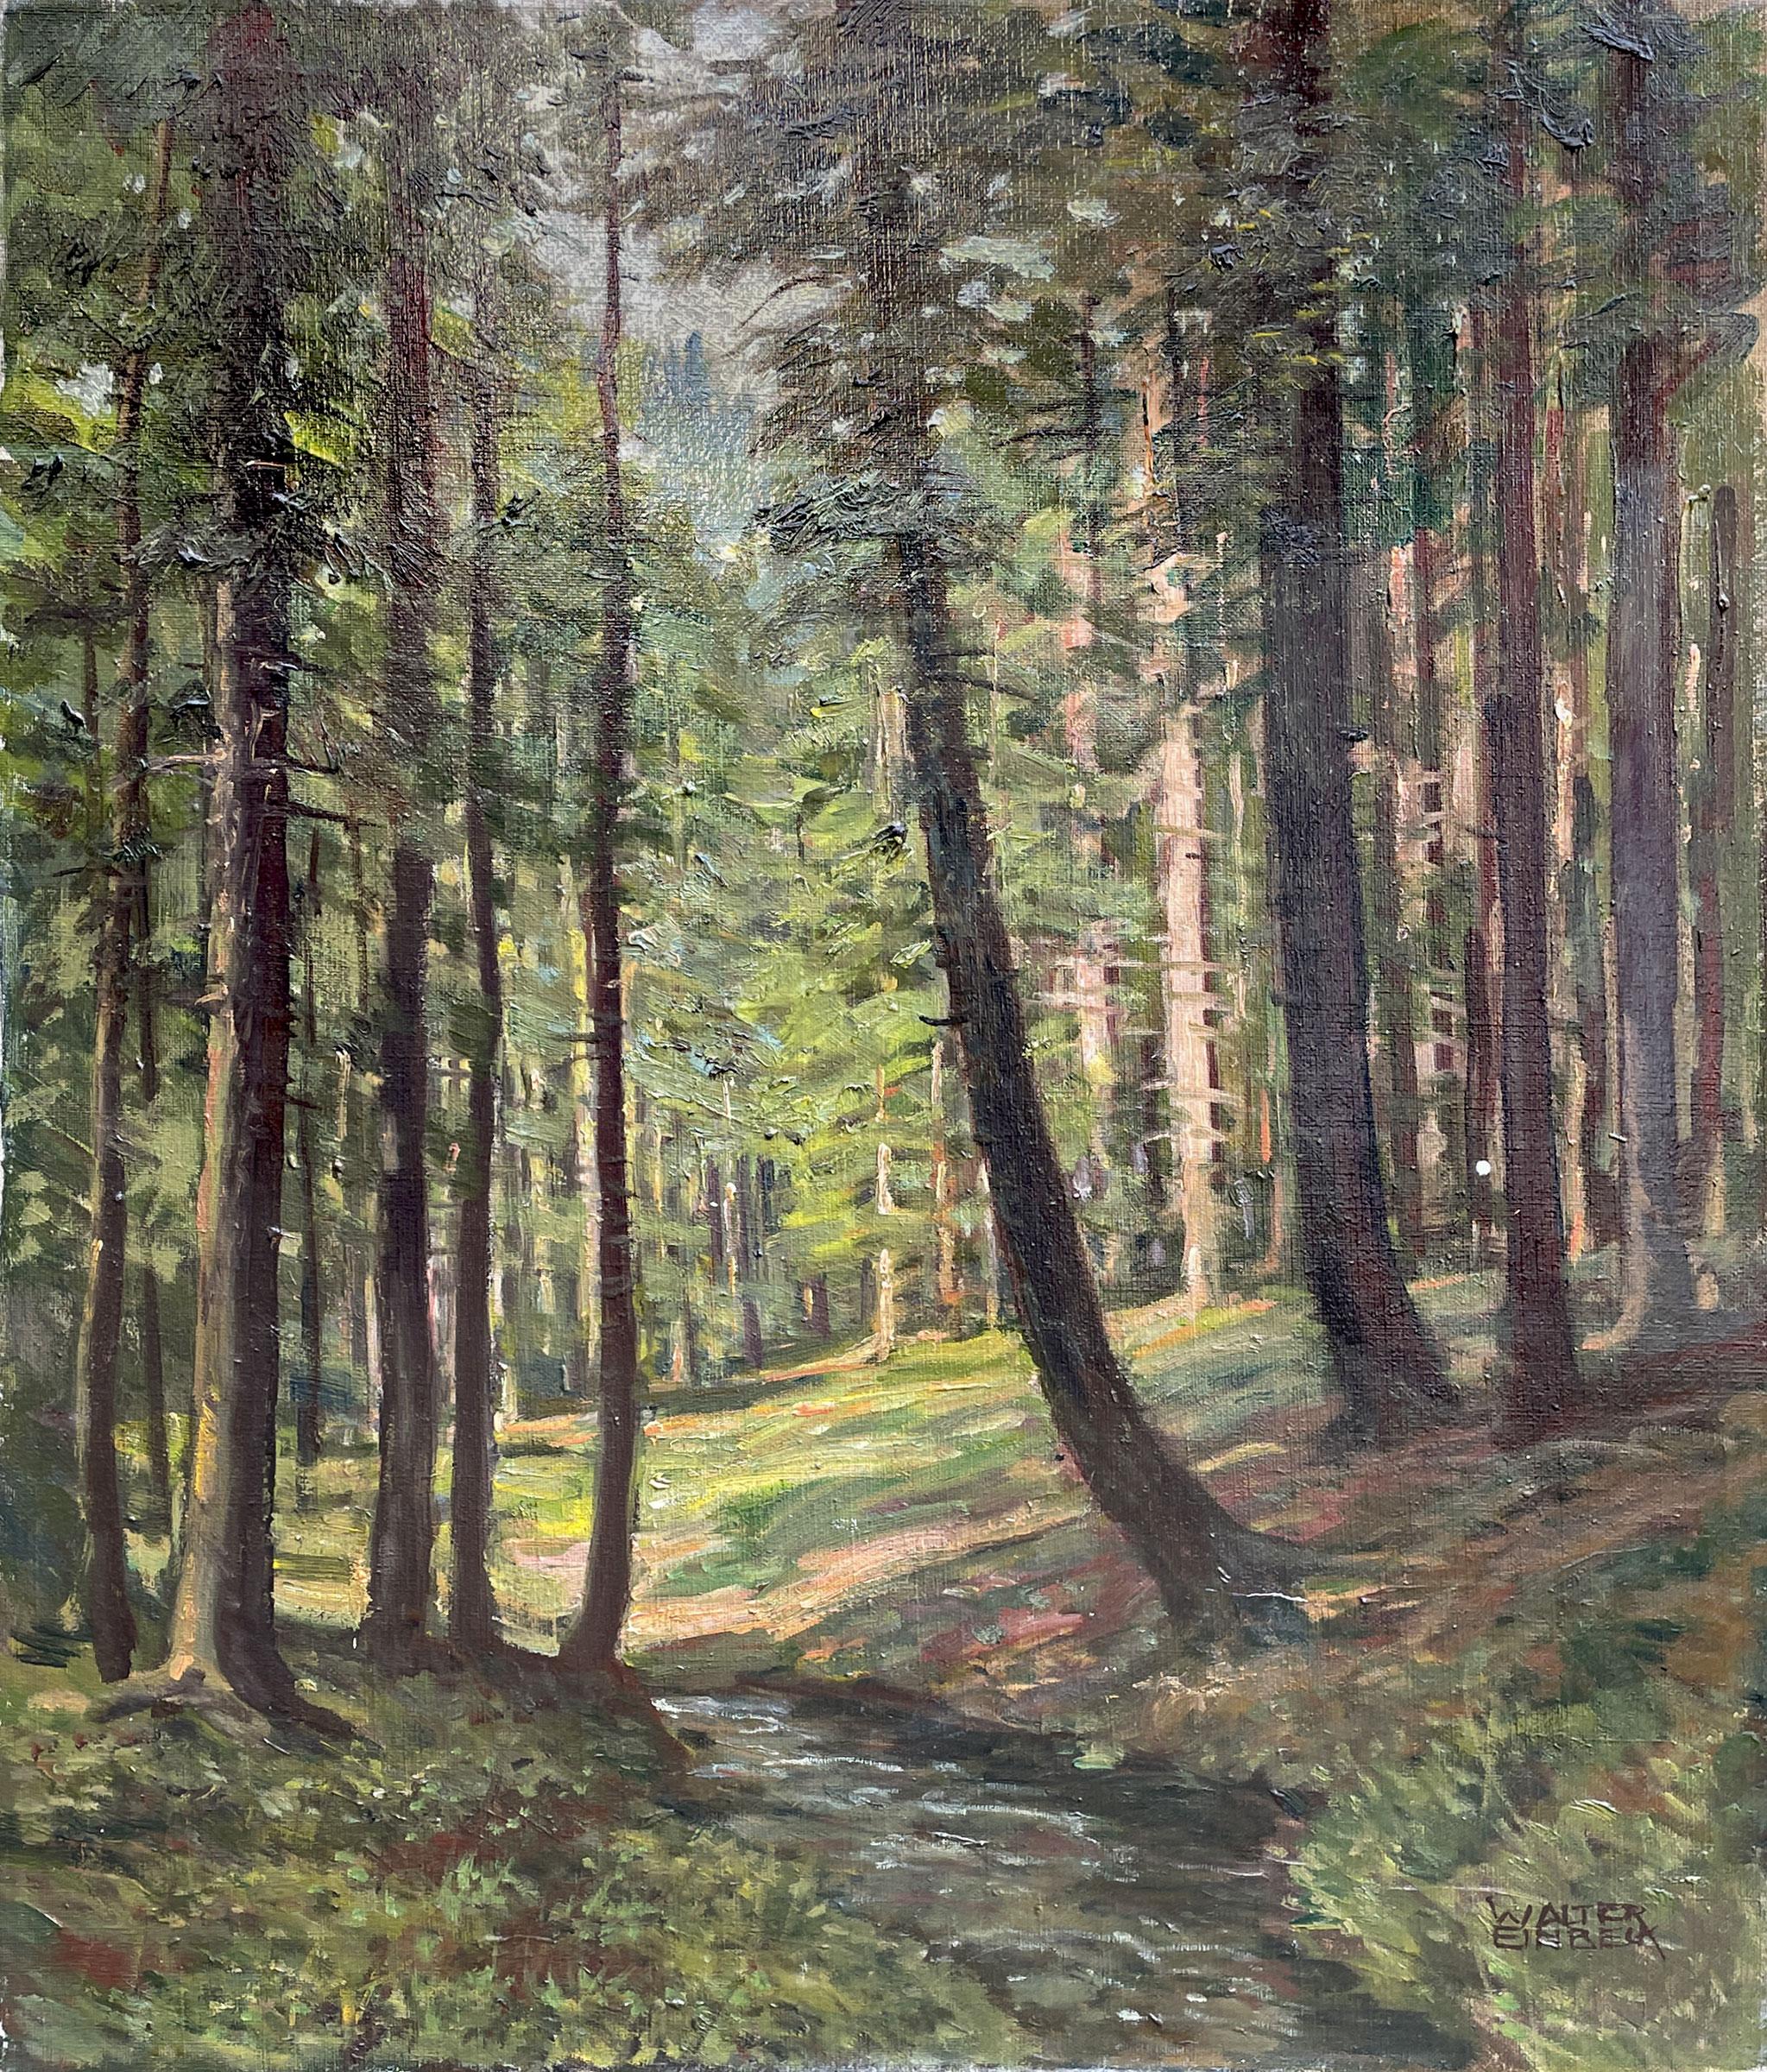 Walter Einbeck - Alpine forest in summer

cm60 x cm50 (without frame) - oil on canvas

Walter Einbeck - (Magdeburg 3 February 1890 - Munich 27 July 1968)
From 1908 to 1910 Walter Einbeck went to the Munich Academy of Art, and then attended the